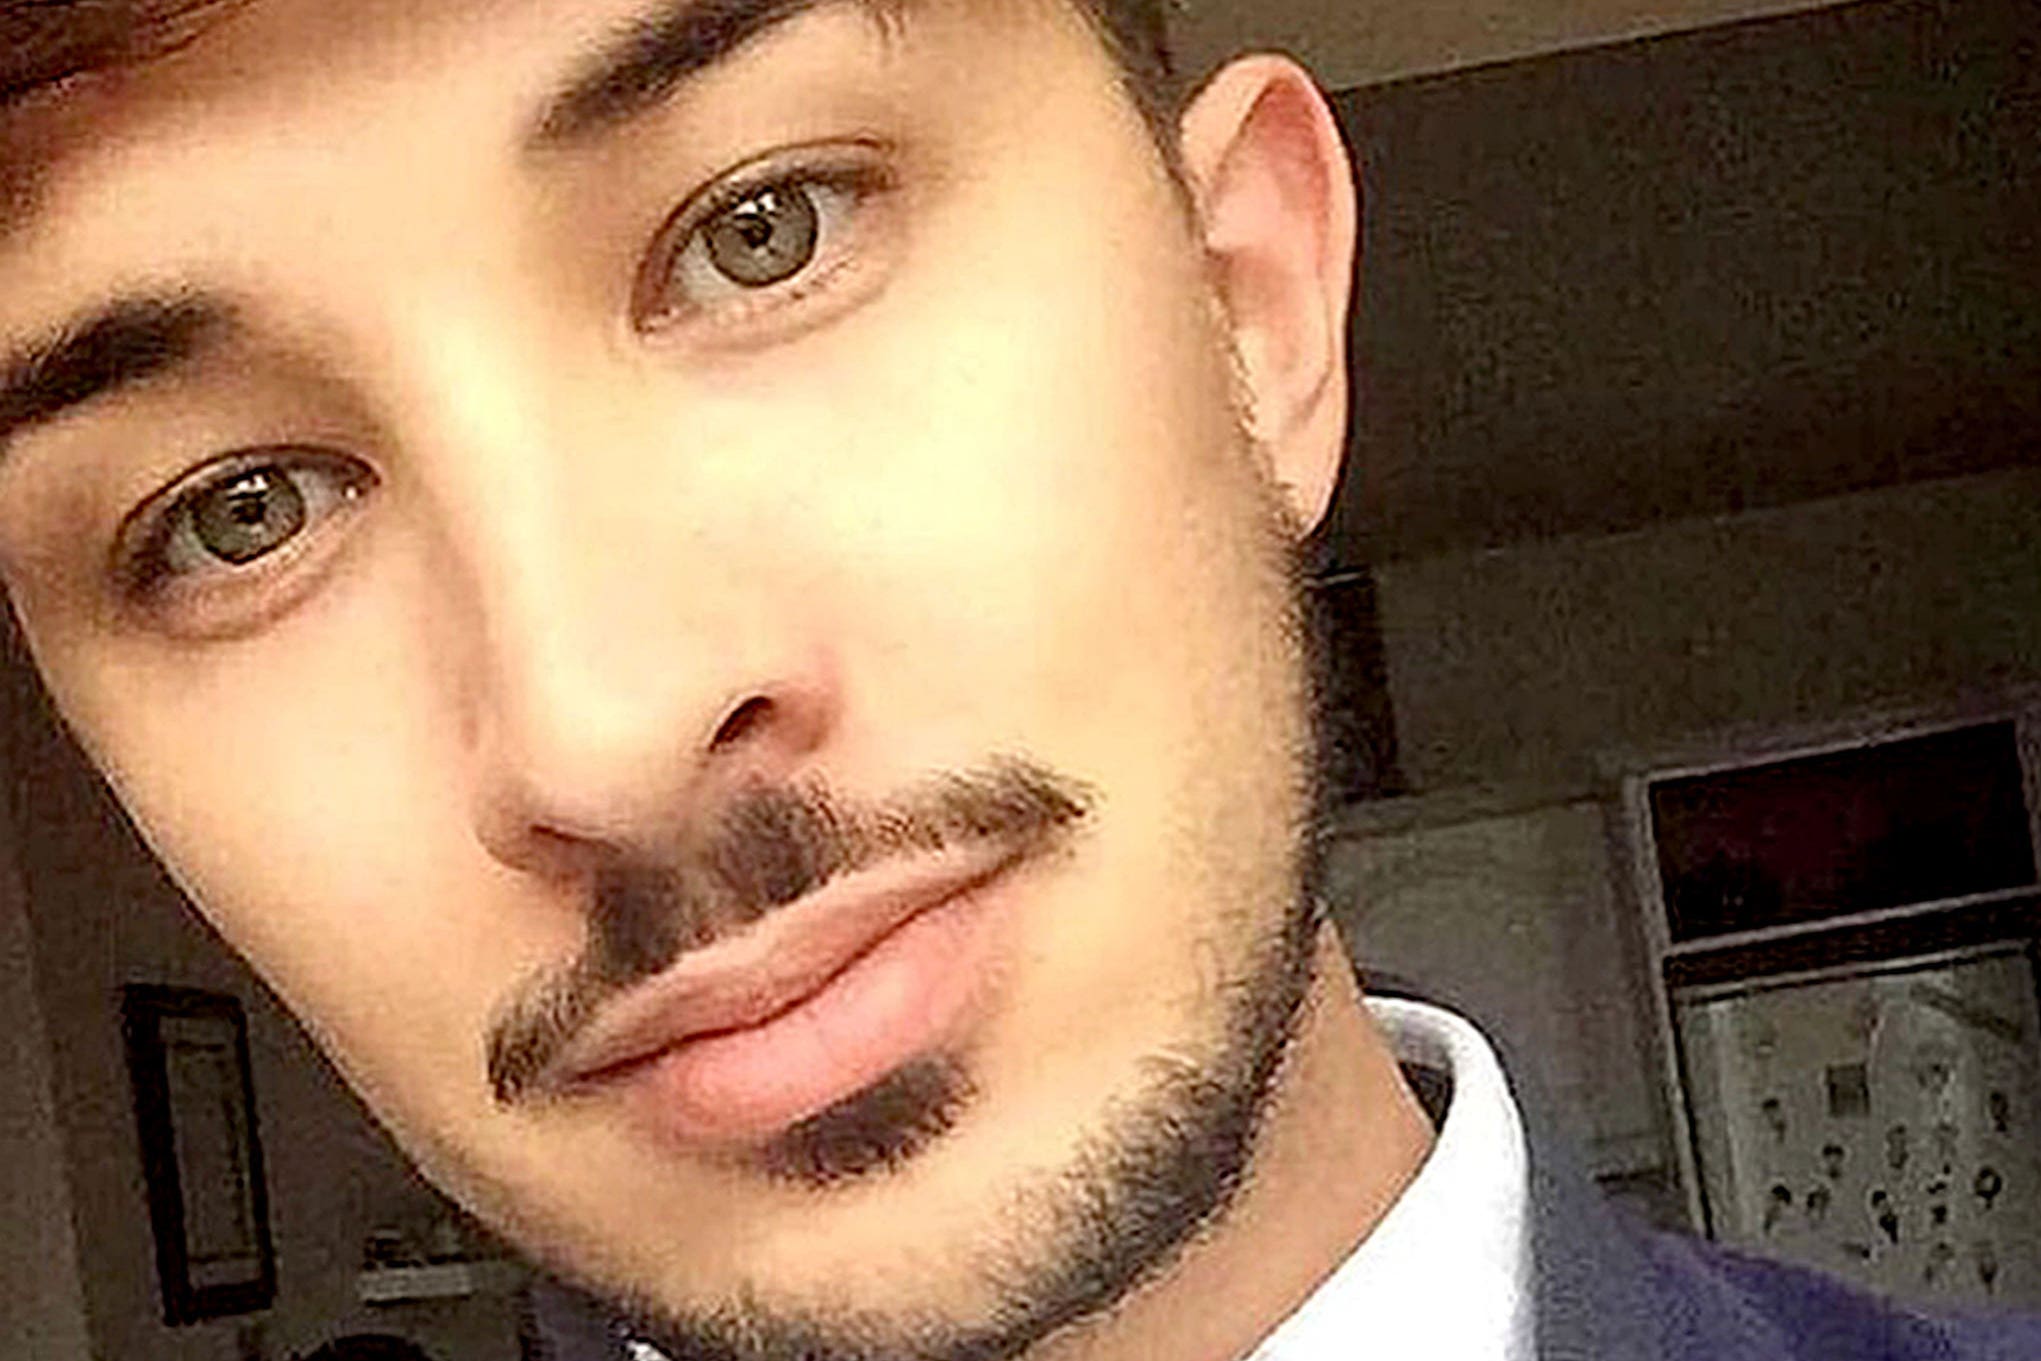 The legislation was dubbed Martyn’s Law in memory of the Manchester Arena bombing victim, Martyn Hett